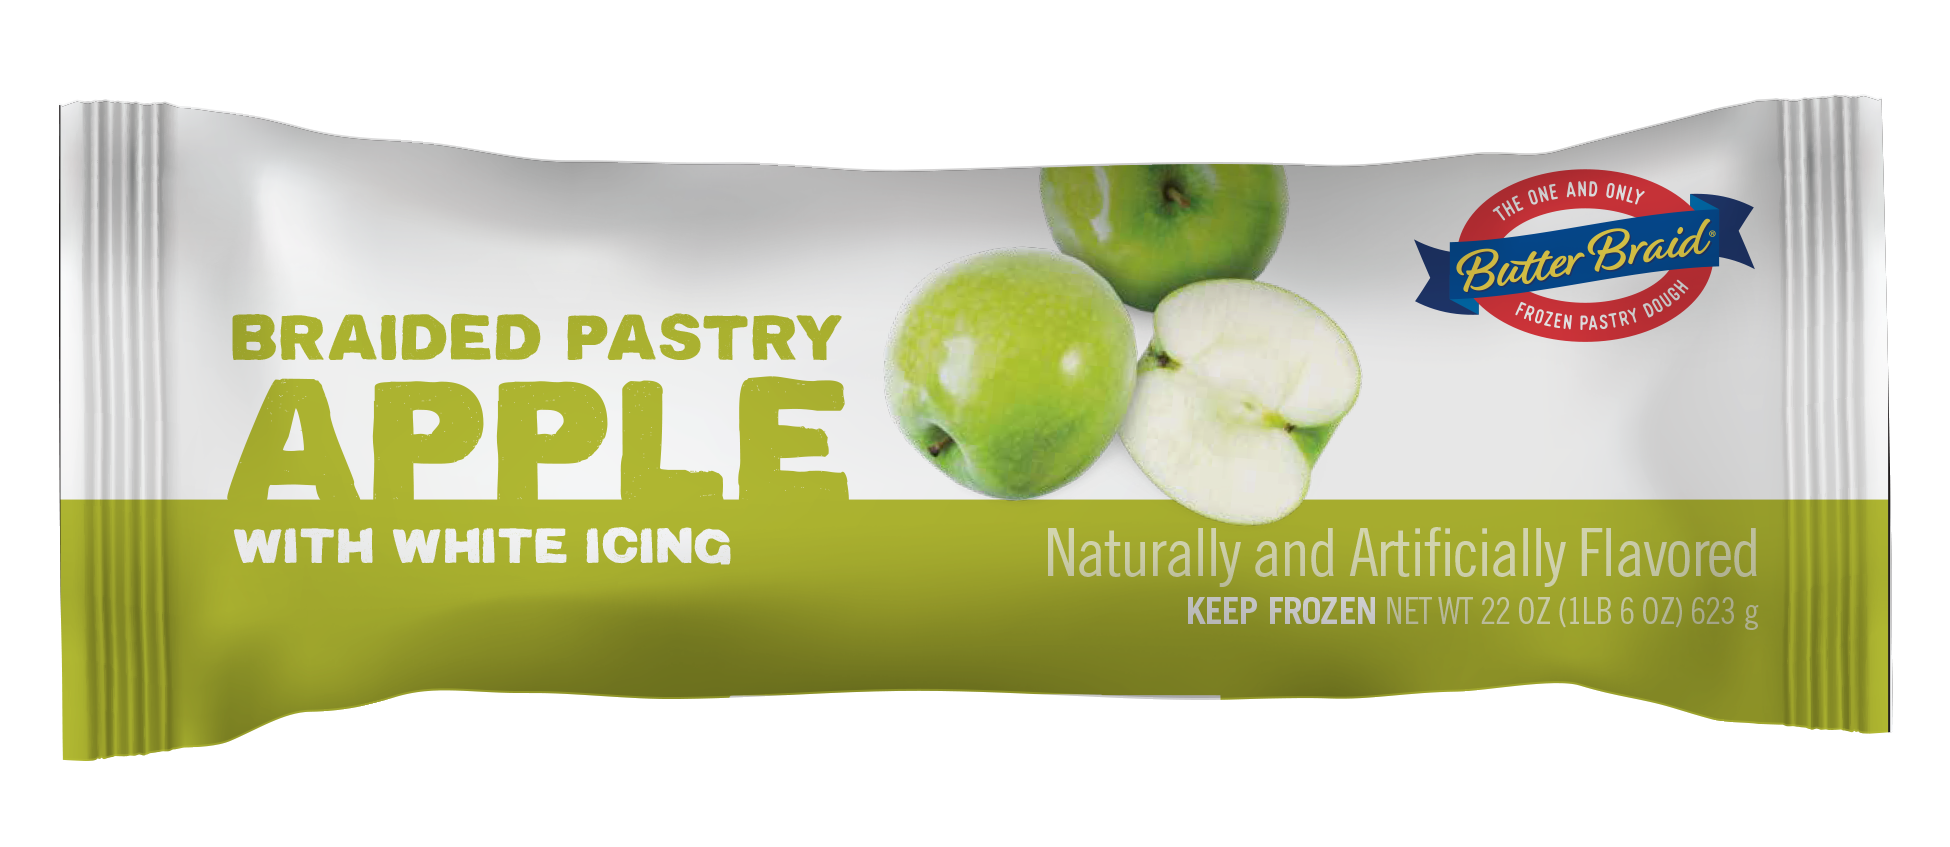 Apple butter braid® pastry packaging